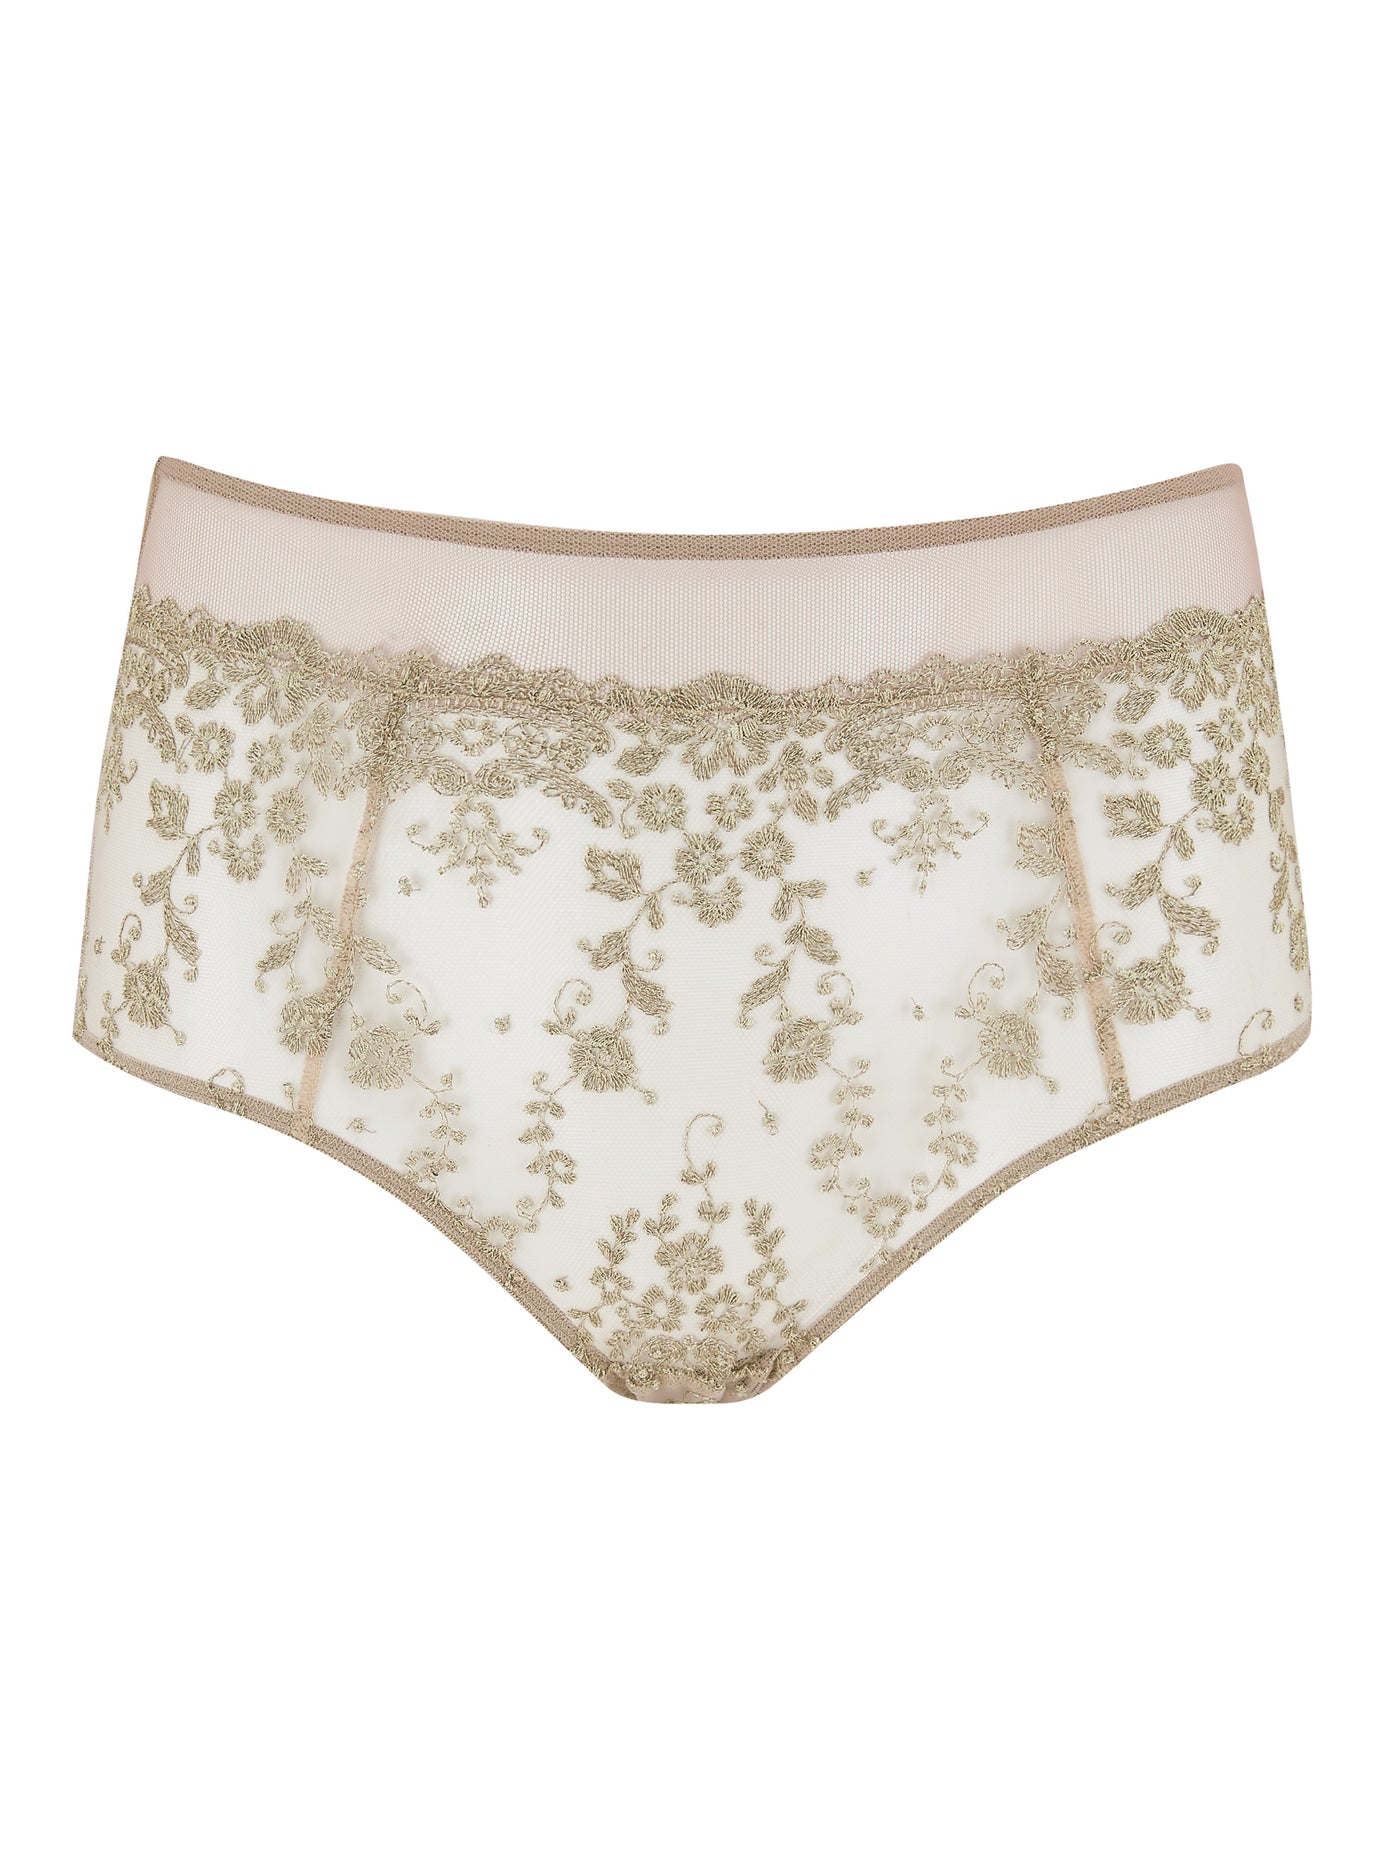 Abrielle gold embroidered high waist knickers